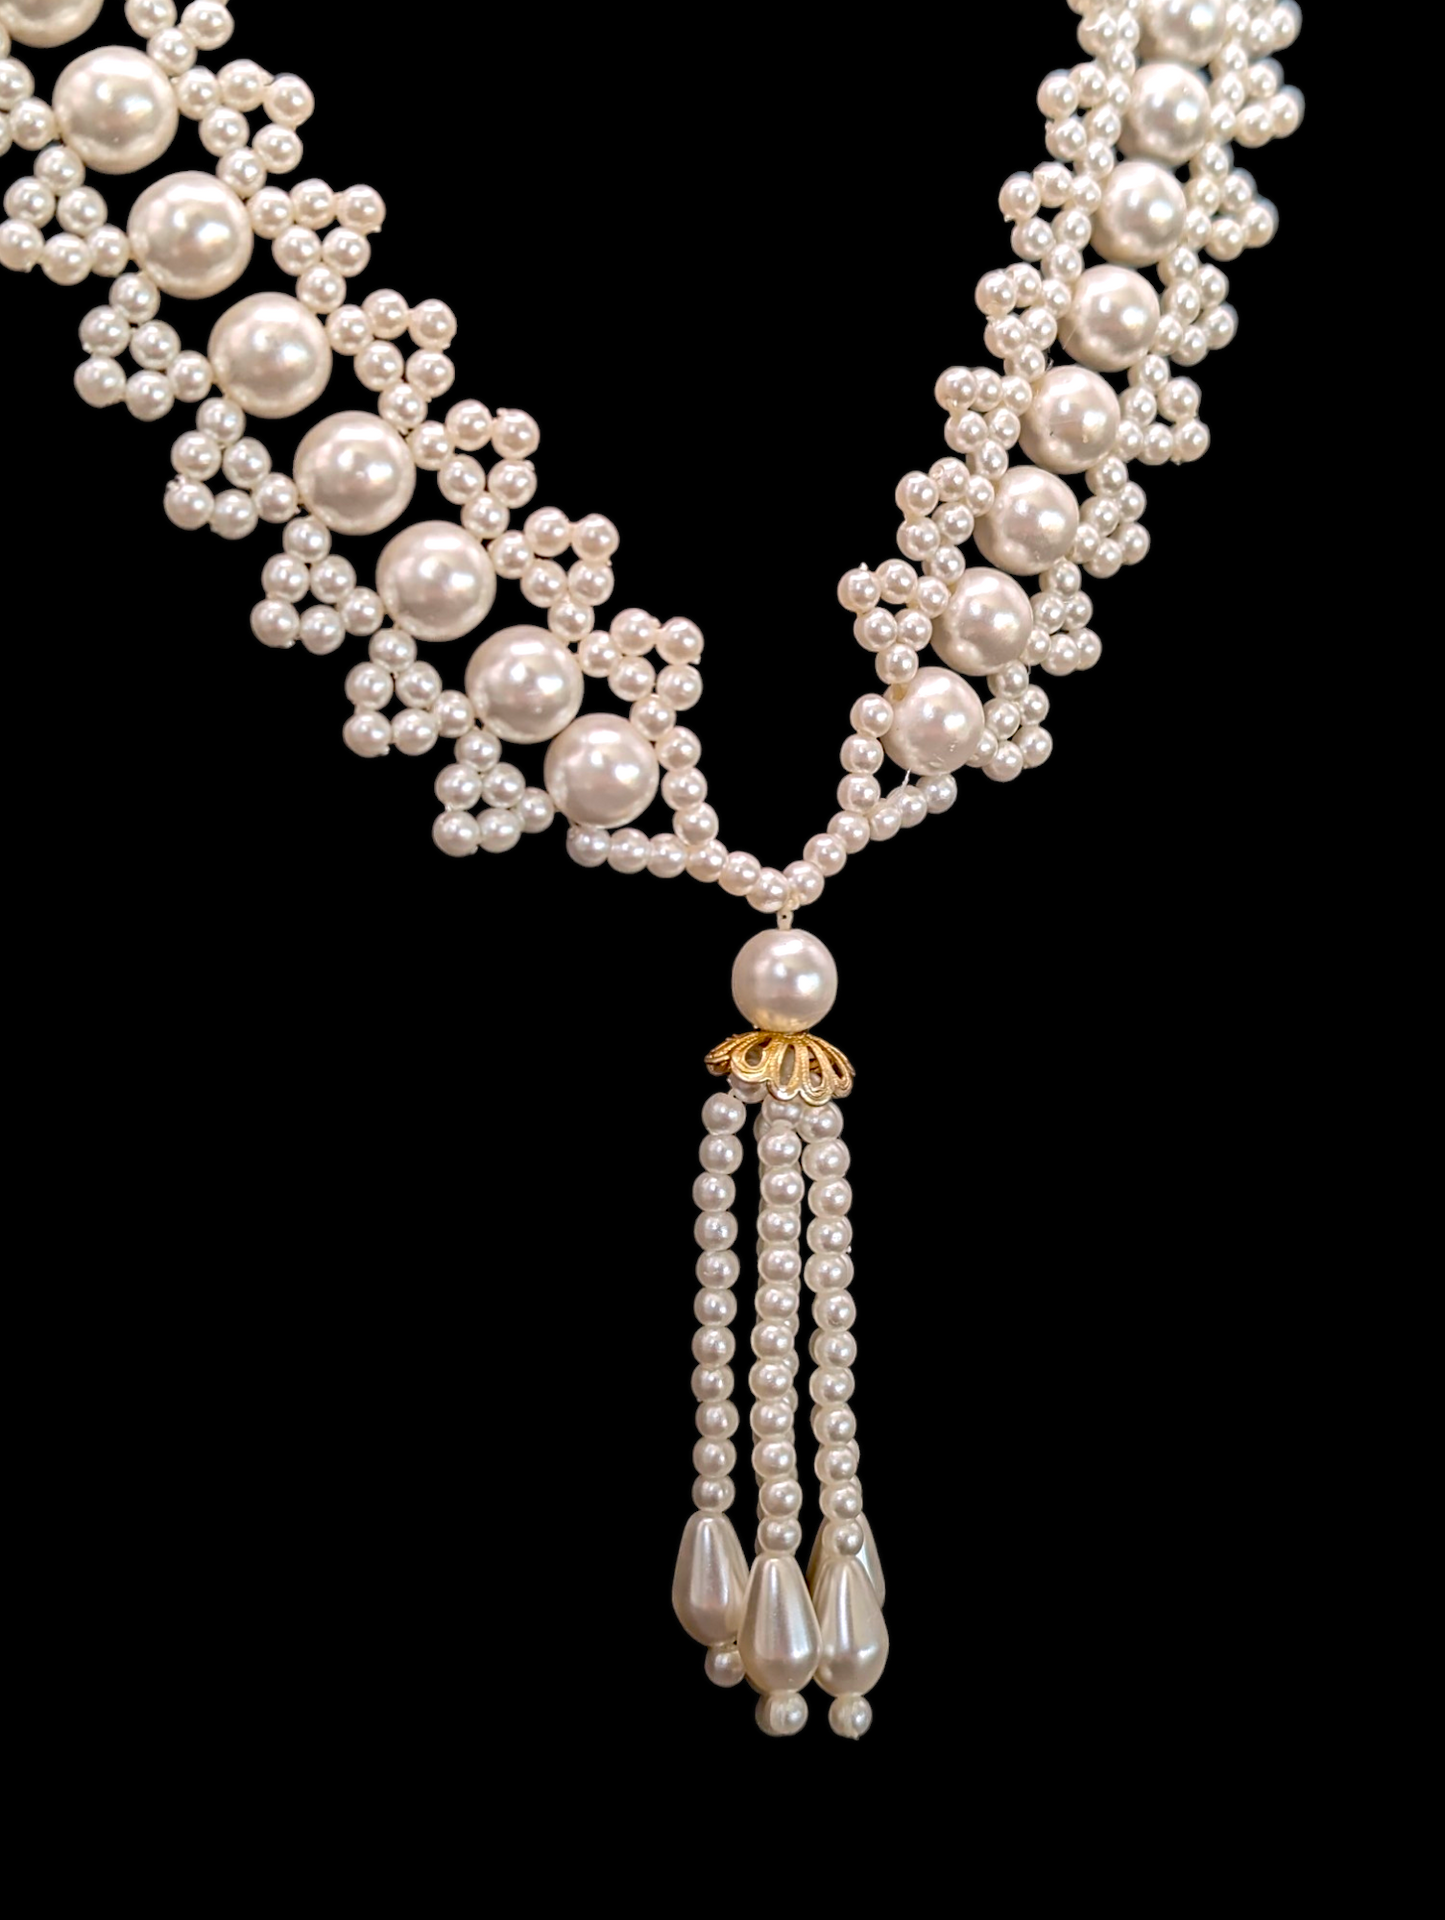 Vintage Intricate Art Deco Inspired Unique Pearl Necklace with Fringe Pendant